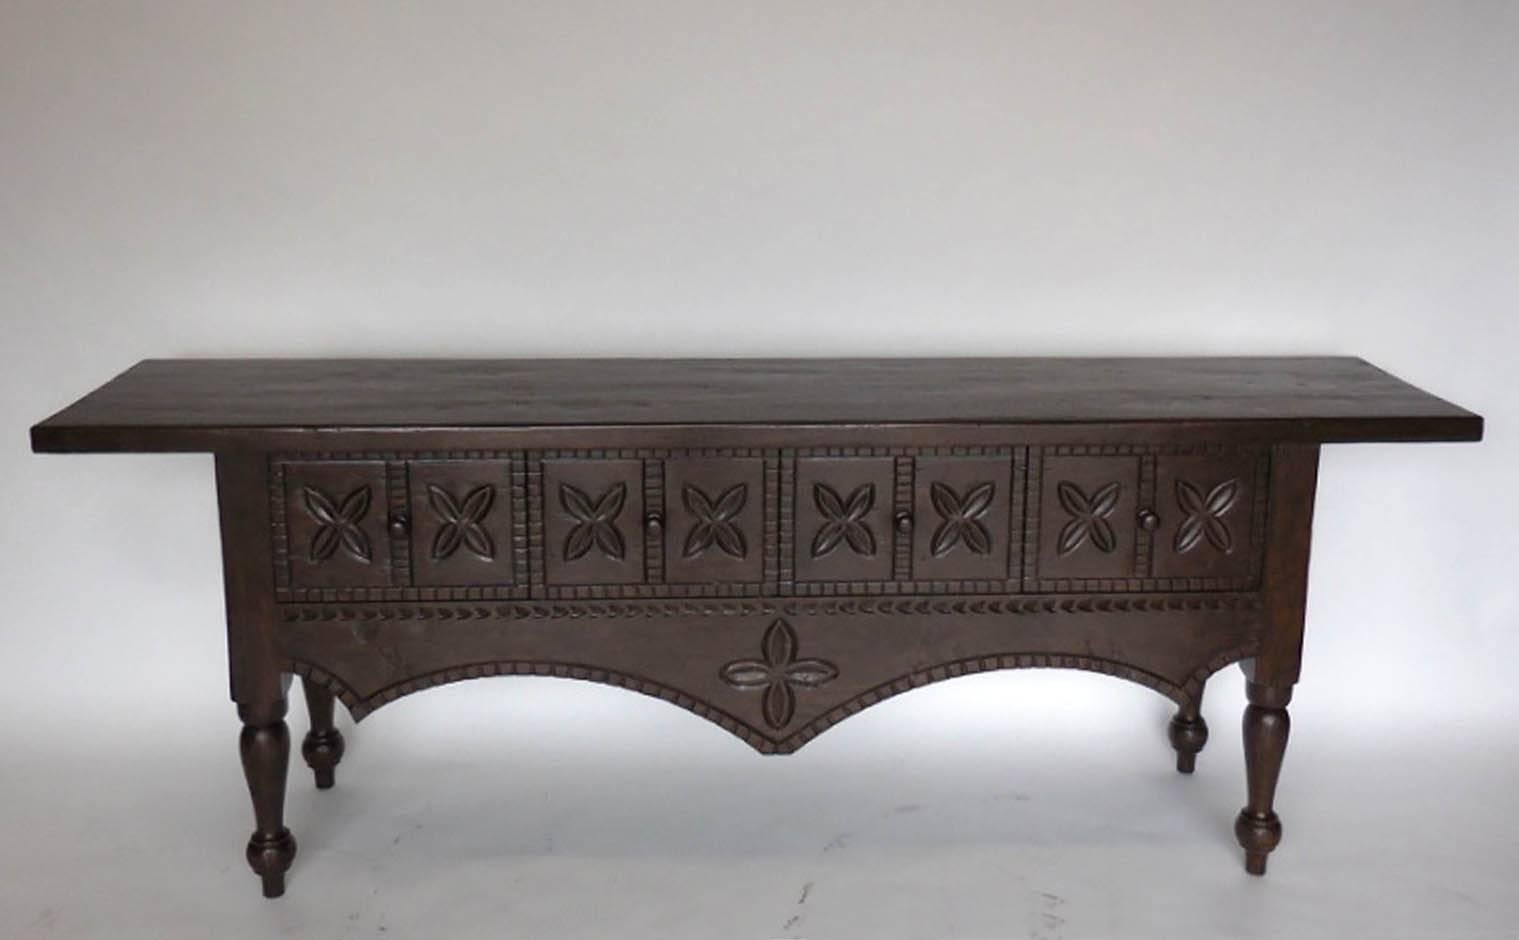 Beautifully carved walnut console with four drawers based on an indigenous Guatemalan design. Can be made in custom sizes and finishes. Made in Los Angeles by Dos Gallos Studio.
CUSTOM PRICES ARE SUBJECT TO CHANGE. PLEASE INQUIRE BEFORE PLACING AN